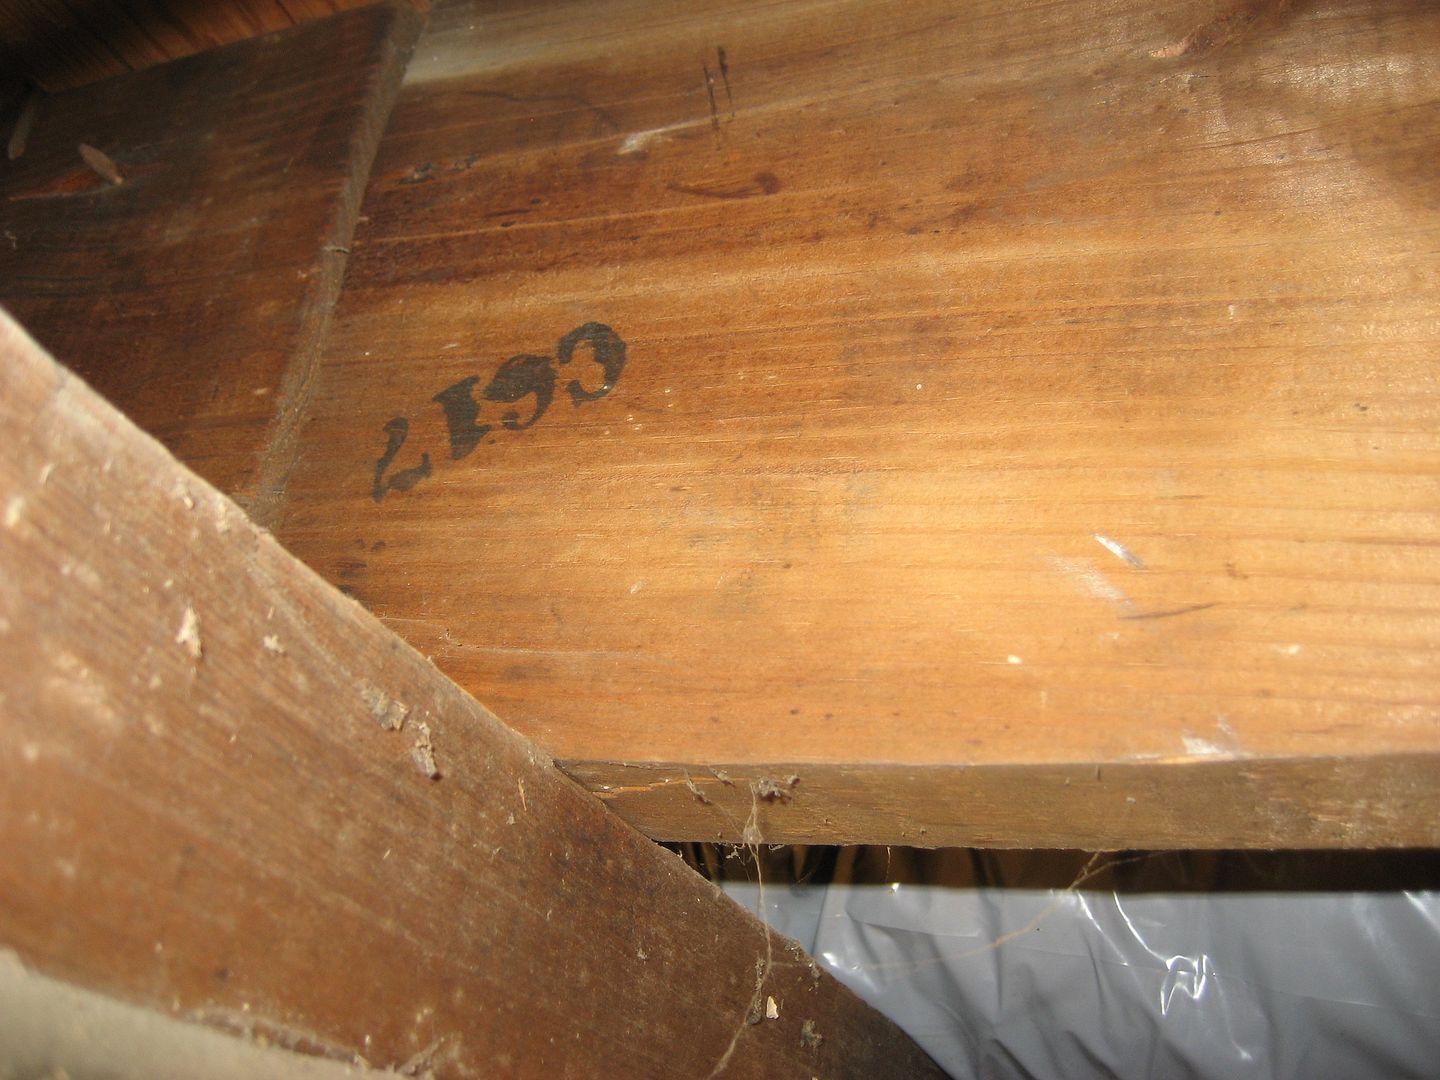 The mark appears on two places: The butt end and also on the tall face, about 2-6 inches from the end of the lumber. 